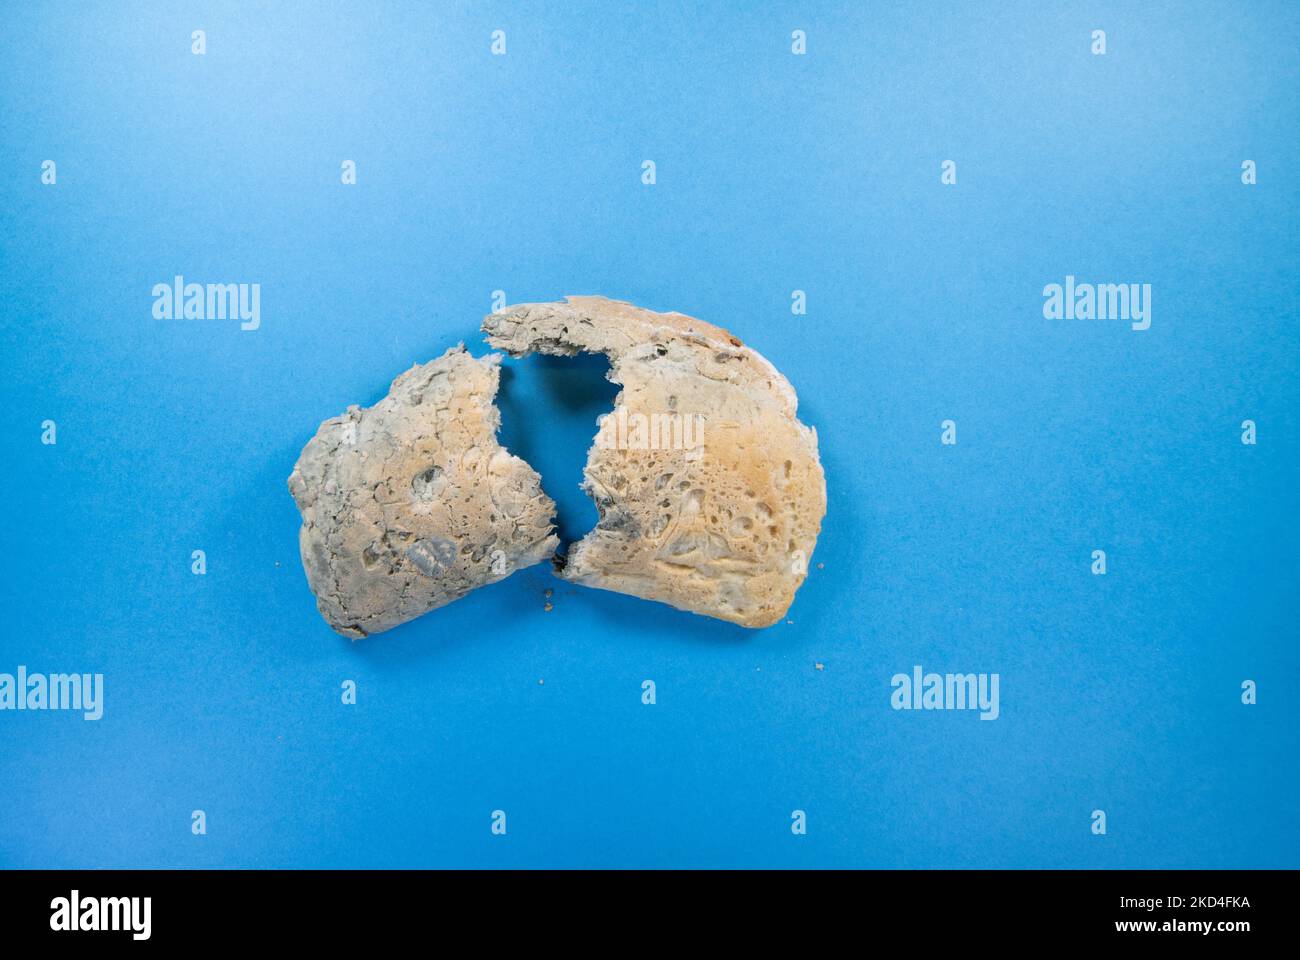 broken crust end of a seeded loaf with blue mould isolated on a dark blue background Stock Photo